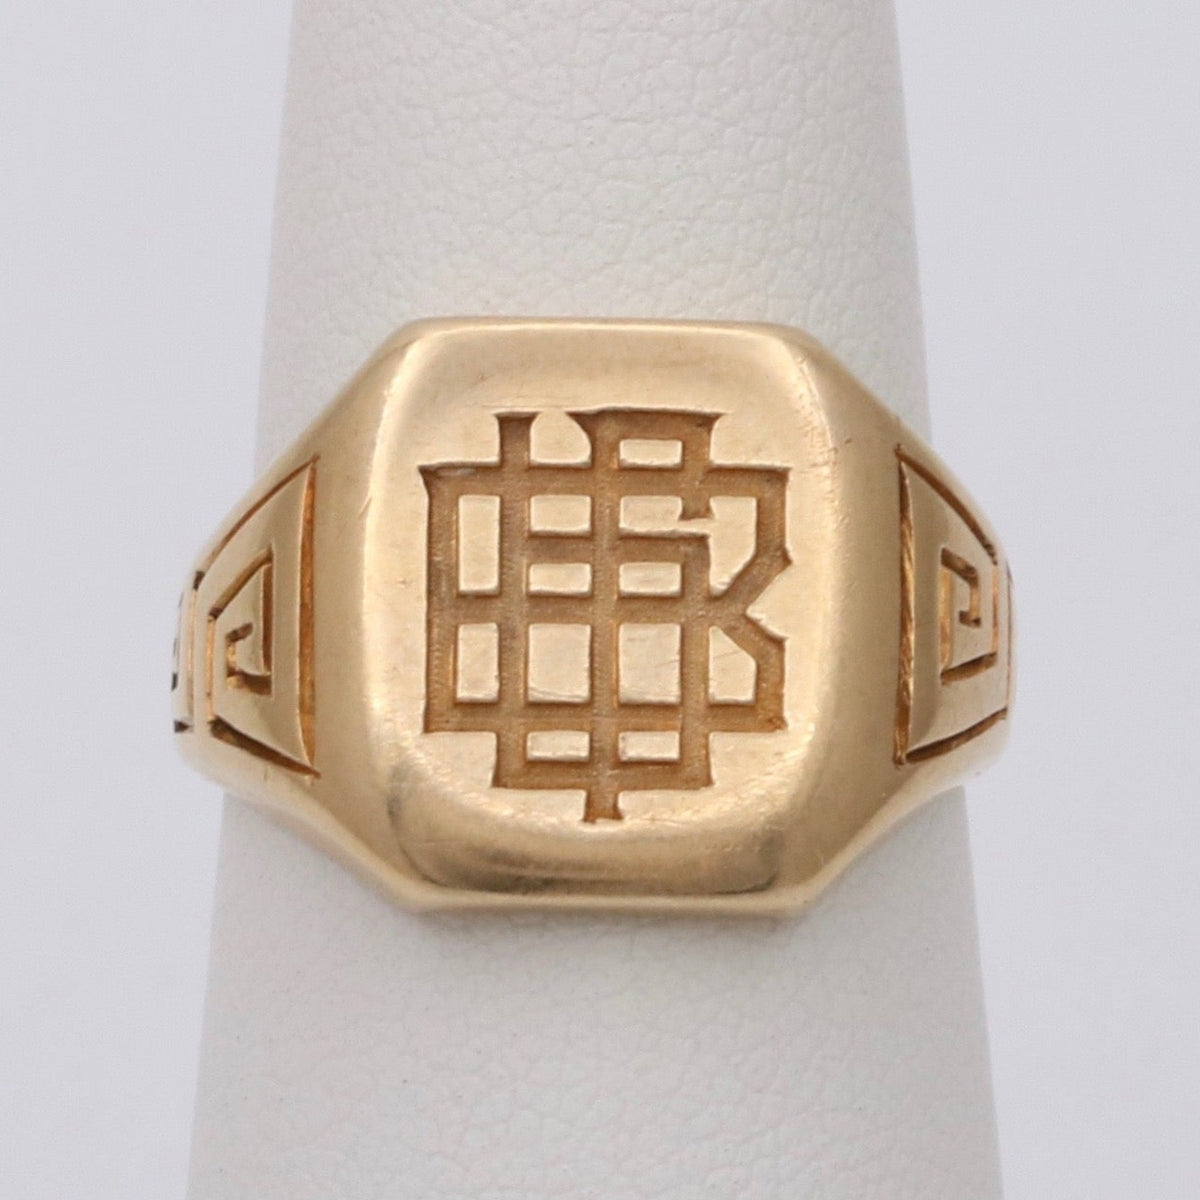 Monogram Carved Vintage Style Ring Initial Ring 